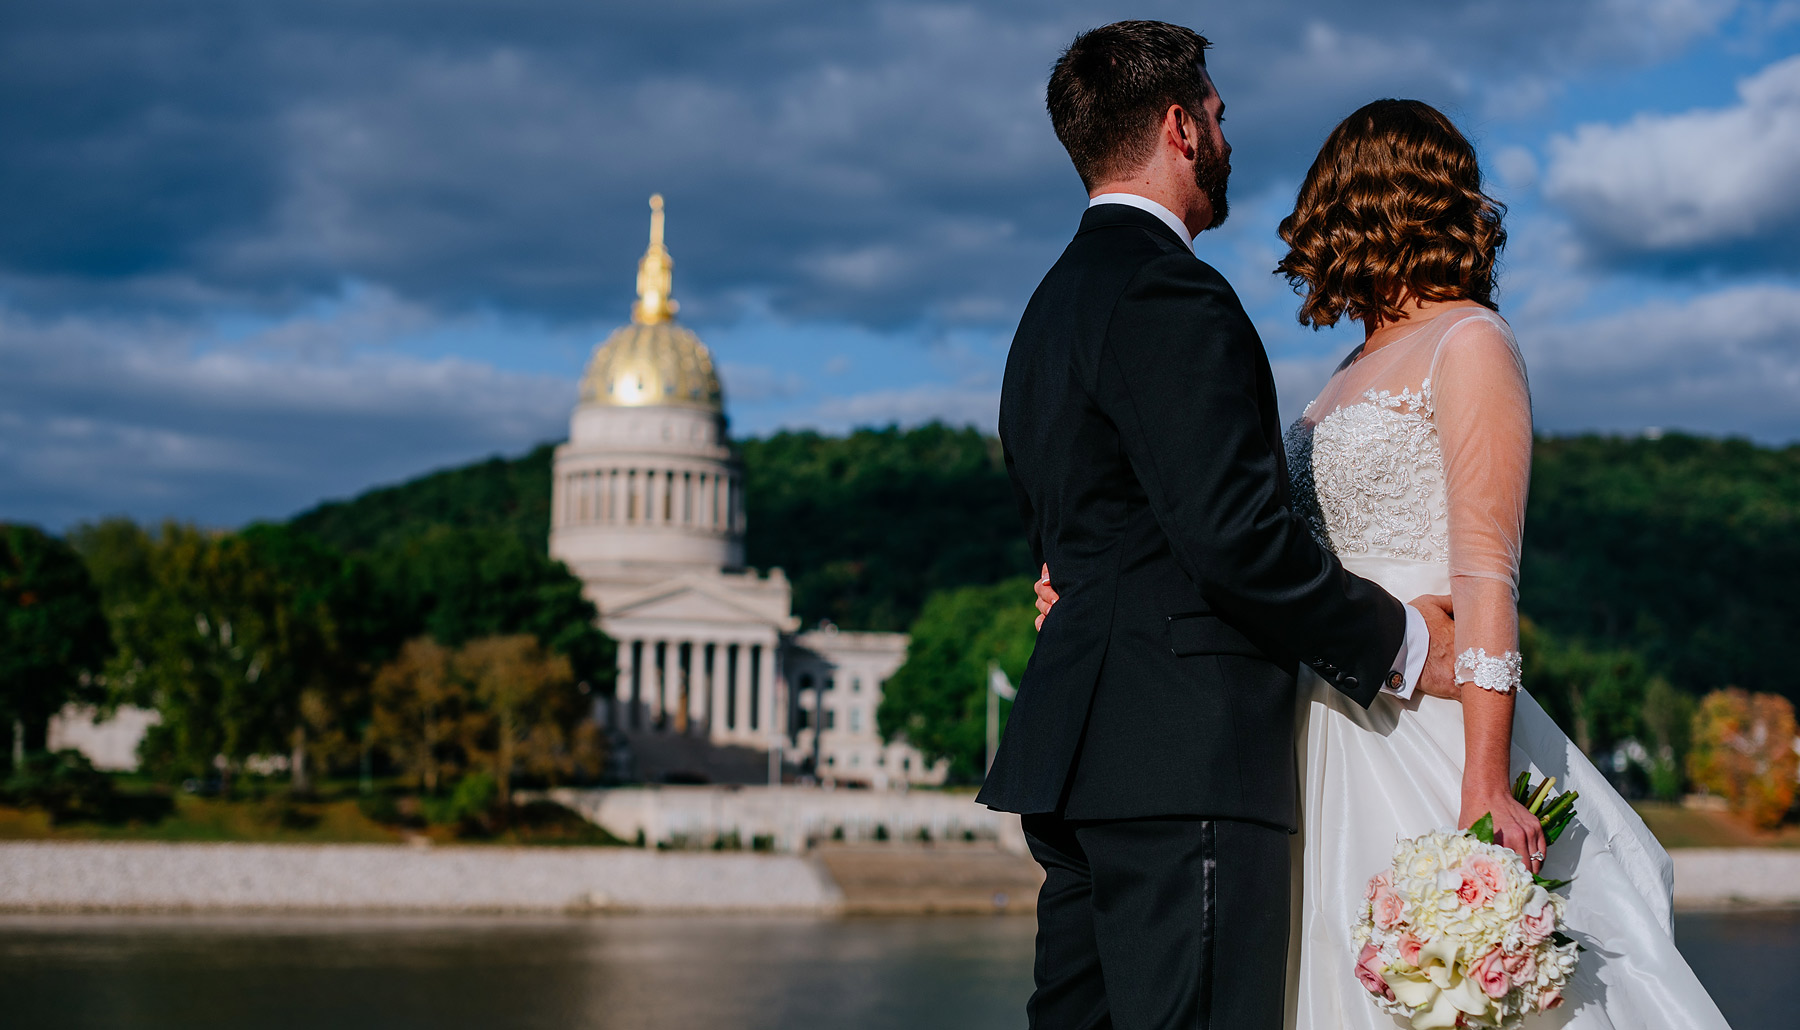 bride and groom overlook wv state capitol gold dome